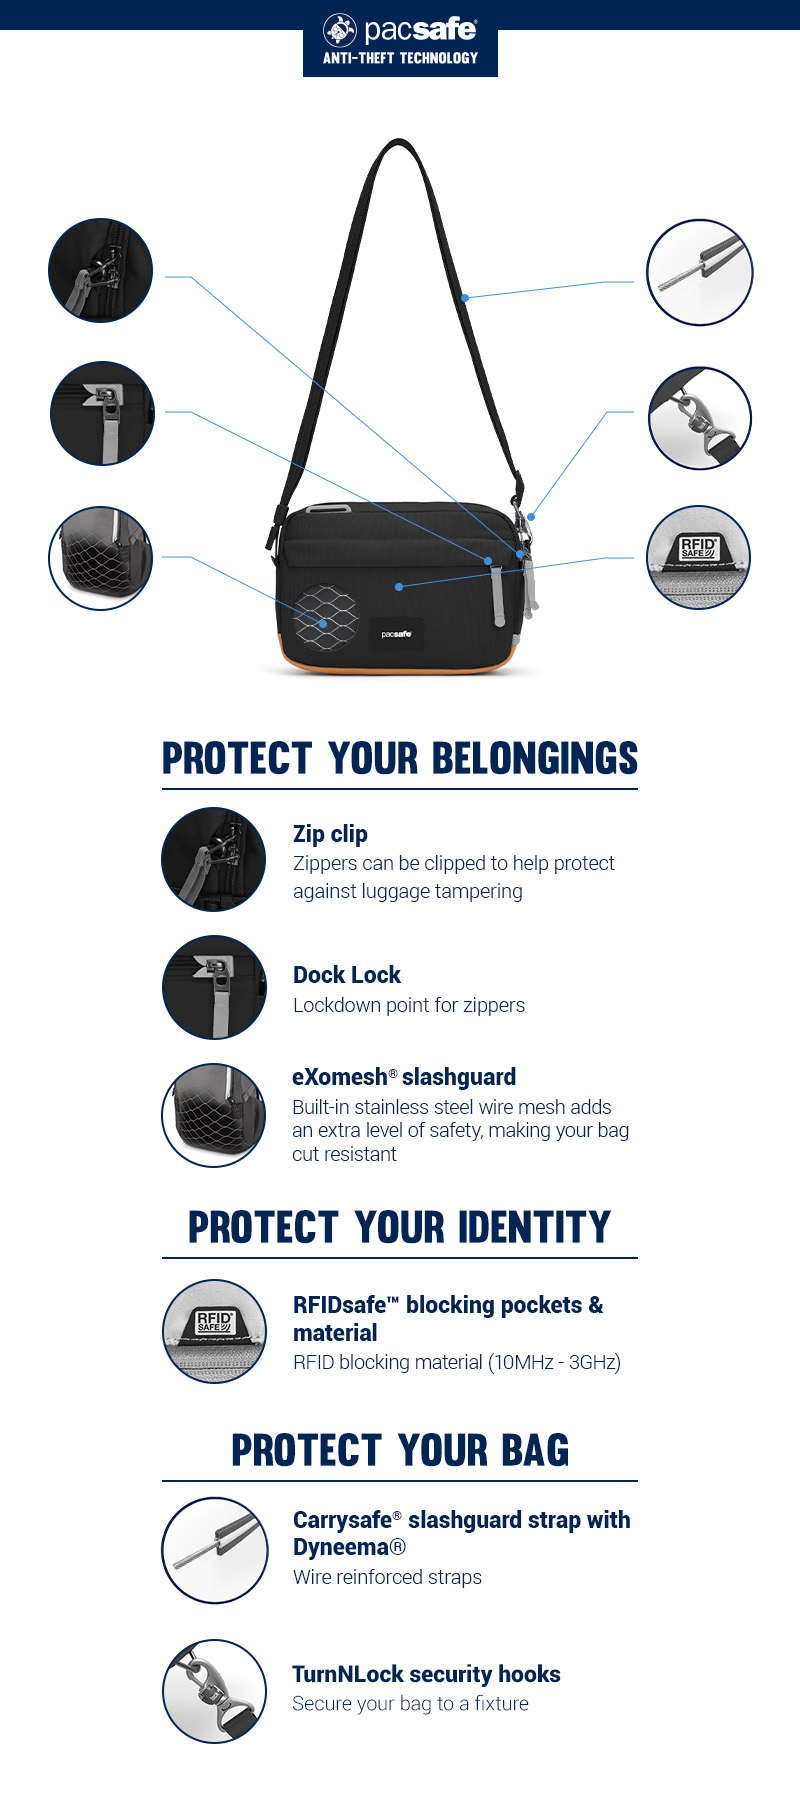 Protect Your Belongs - Zip Clip - Zippers can be clipped to help protect against luggage tempering.
Dock lock - Lock down point for zippers.
eXomesh slashguard - Built-in stainless steel wire mesh adds an extra level of safety, making your bag cut resistant.
Protect Your Bag - Carrysafe slashguard strap with Dyneema - wire reinforced straps.
TurnNLock security hooks - Secure your bag to a fixture.
Protect Your Identity - RFIDsafe blocking pockets & material - RFID blocking material (10 MHz - 3 GHz)